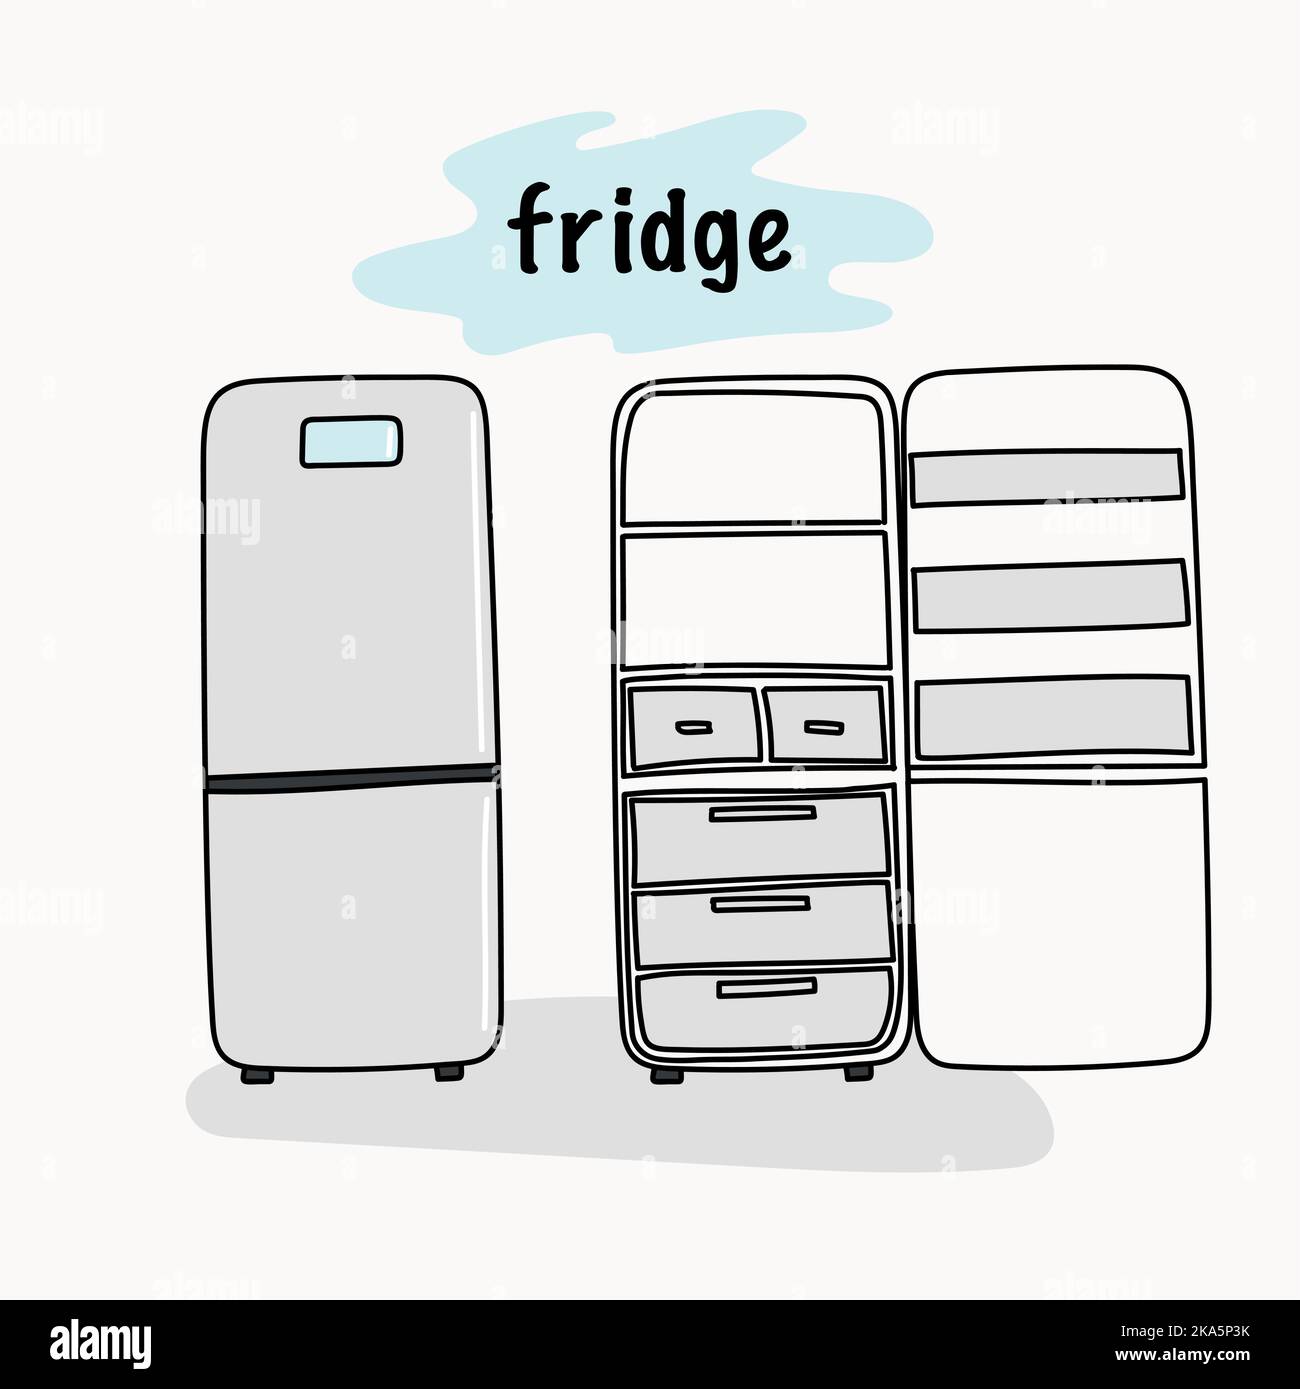 cute picture of fridge freezer open and closed Stock Vector